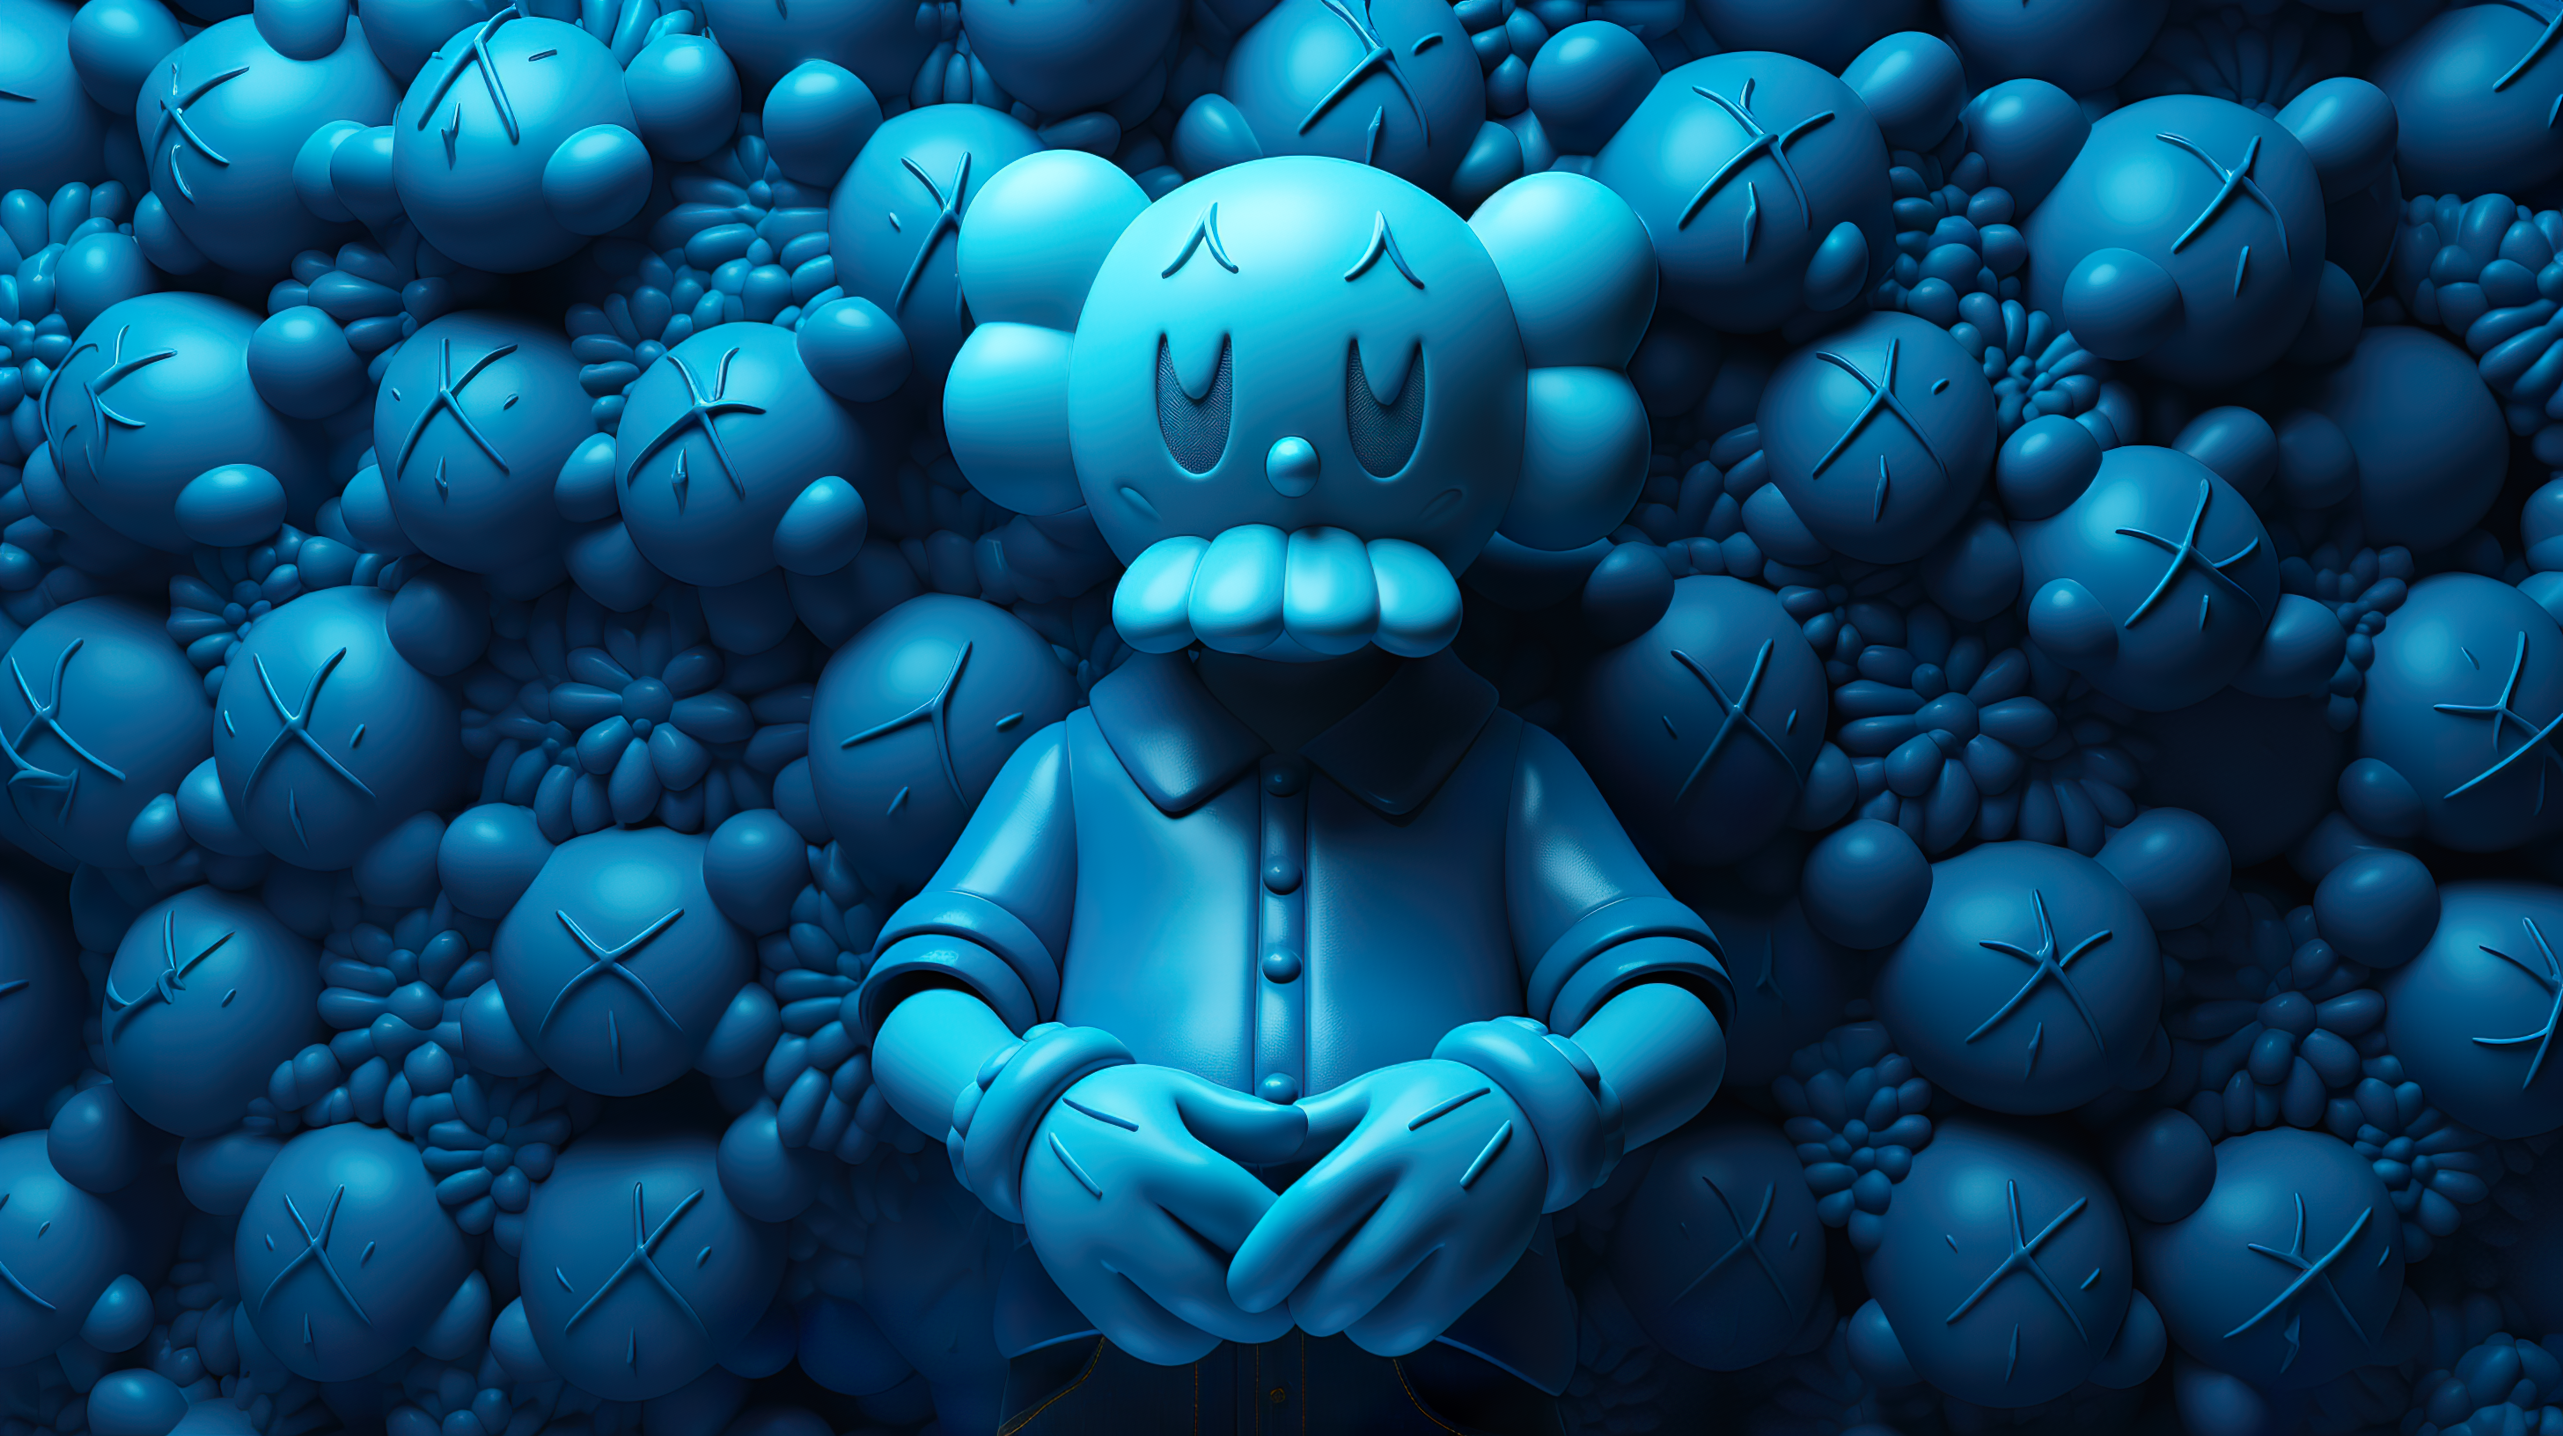 Kaws HD Wallpapers 1000 Free Kaws Wallpaper Images For All Devices